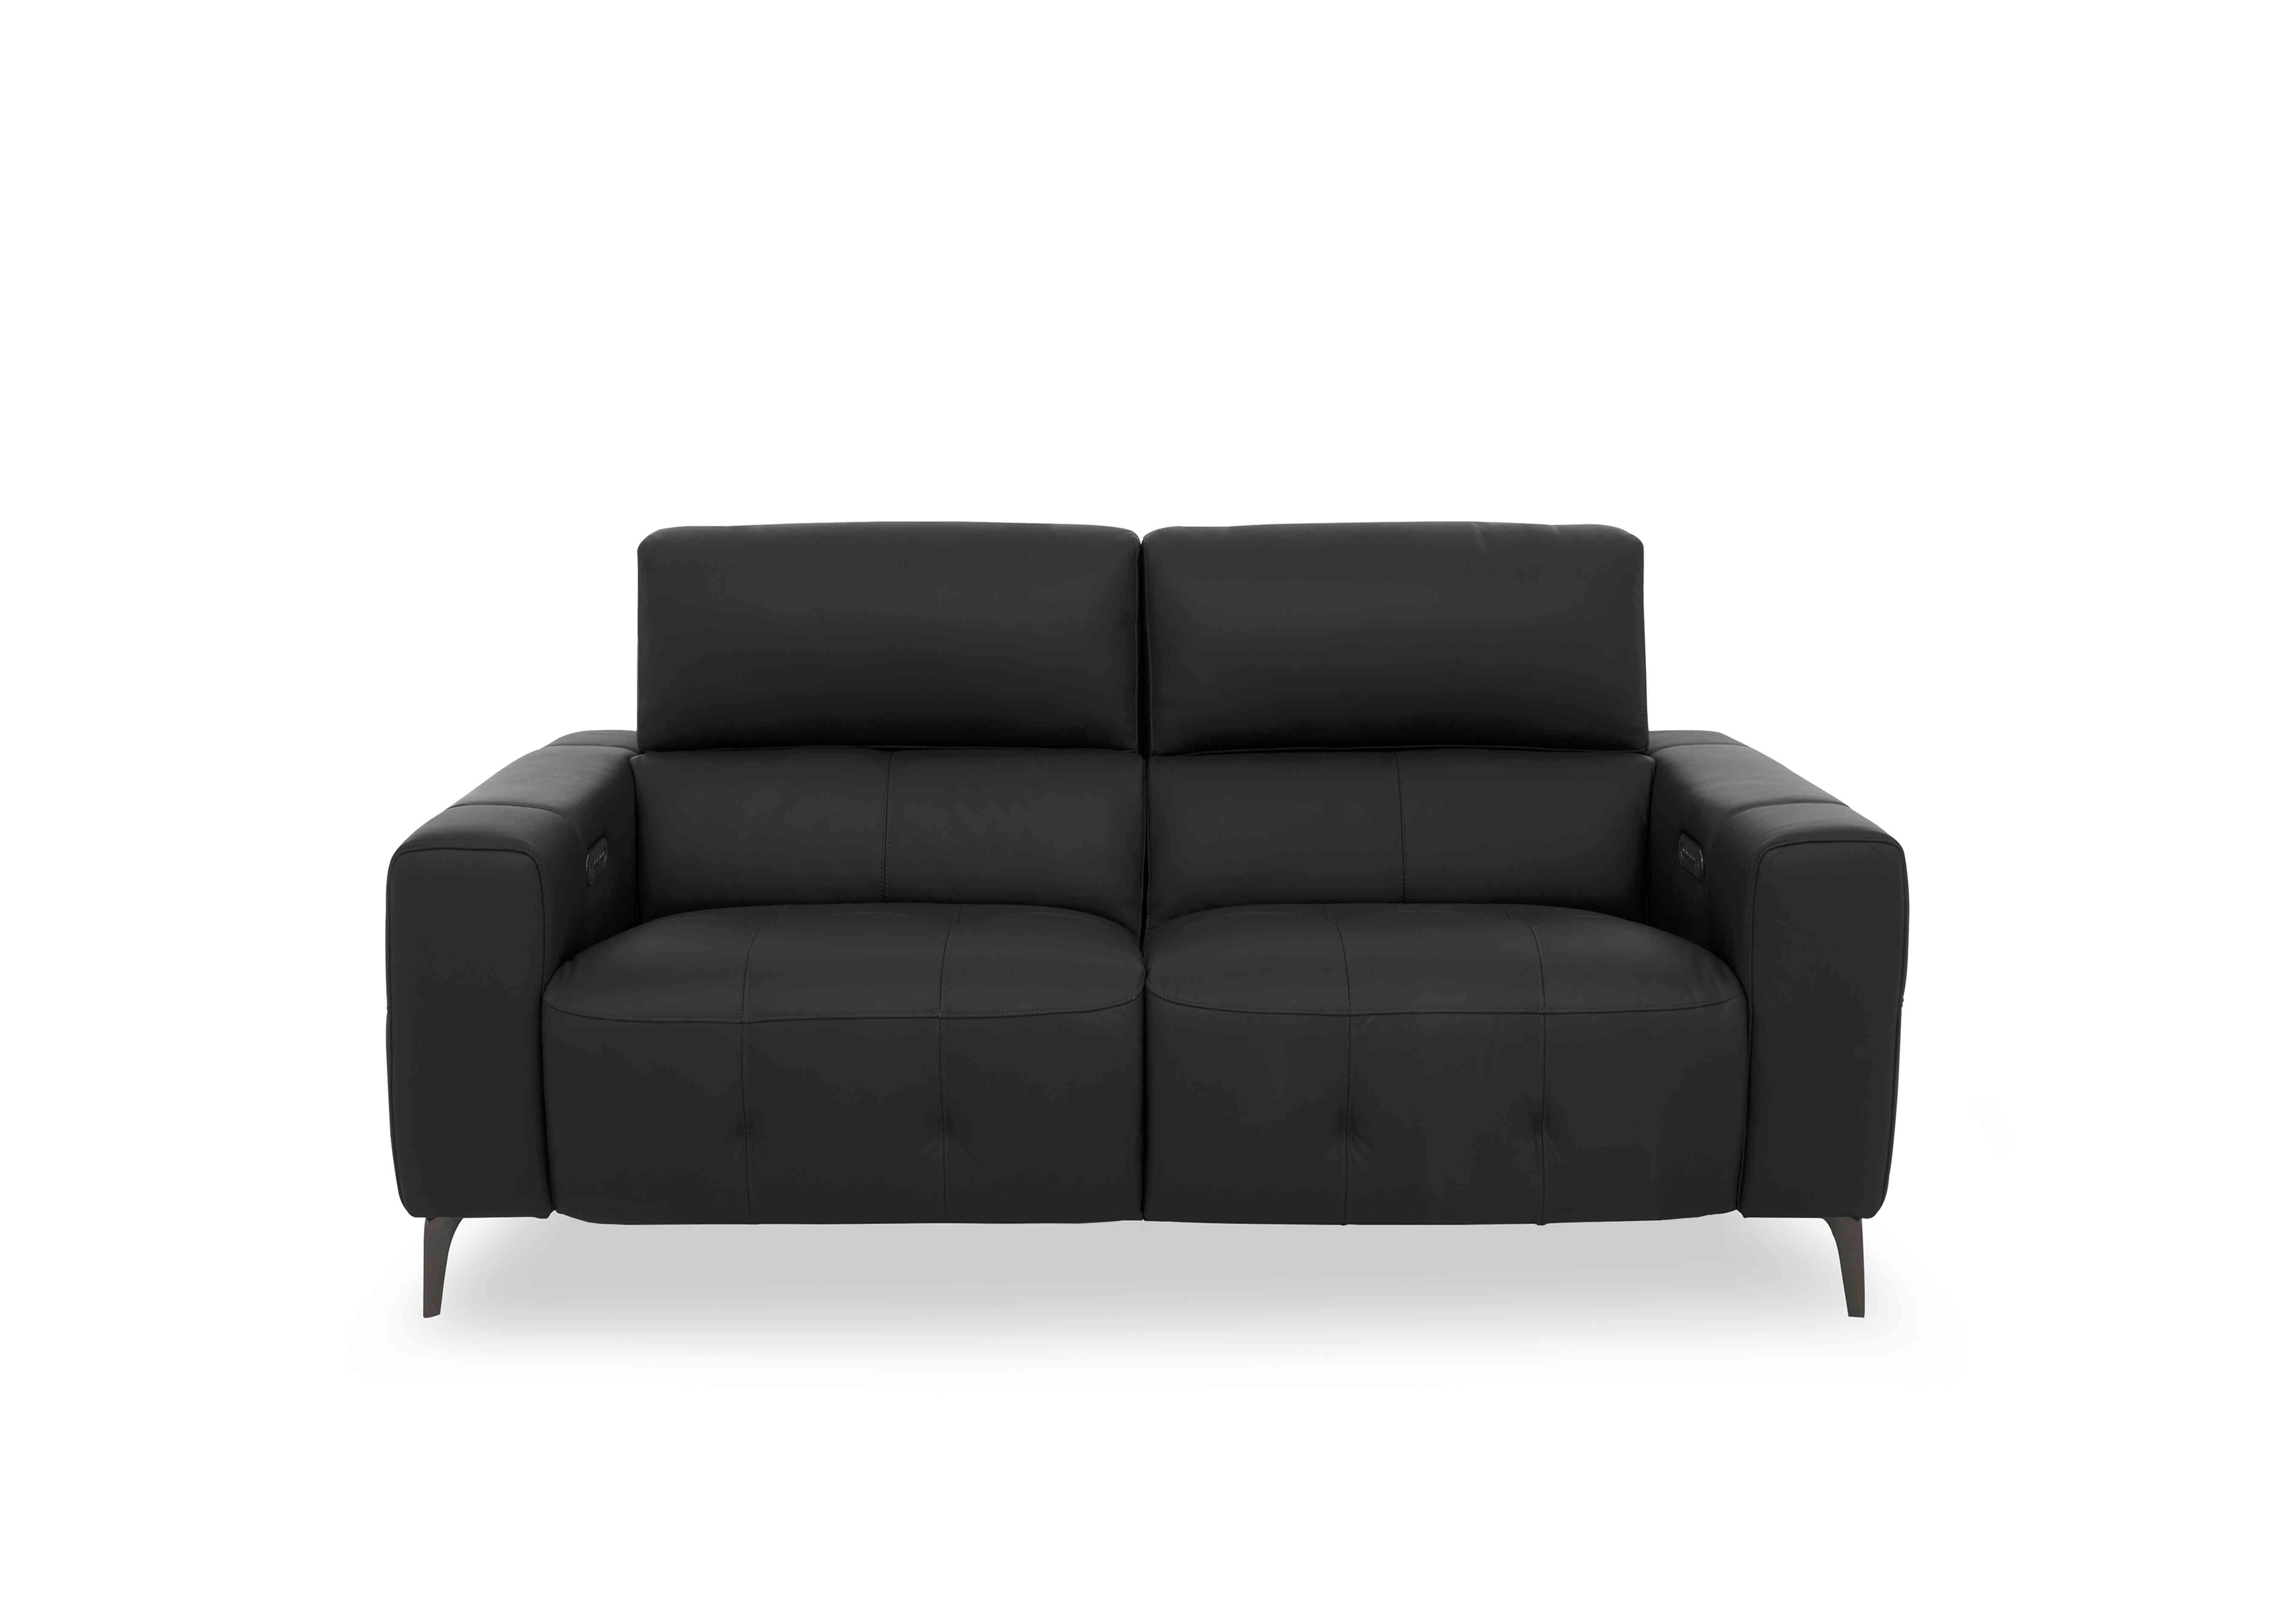 New York 2 Seater Leather Sofa in Bv-3500 Classic Black on Furniture Village